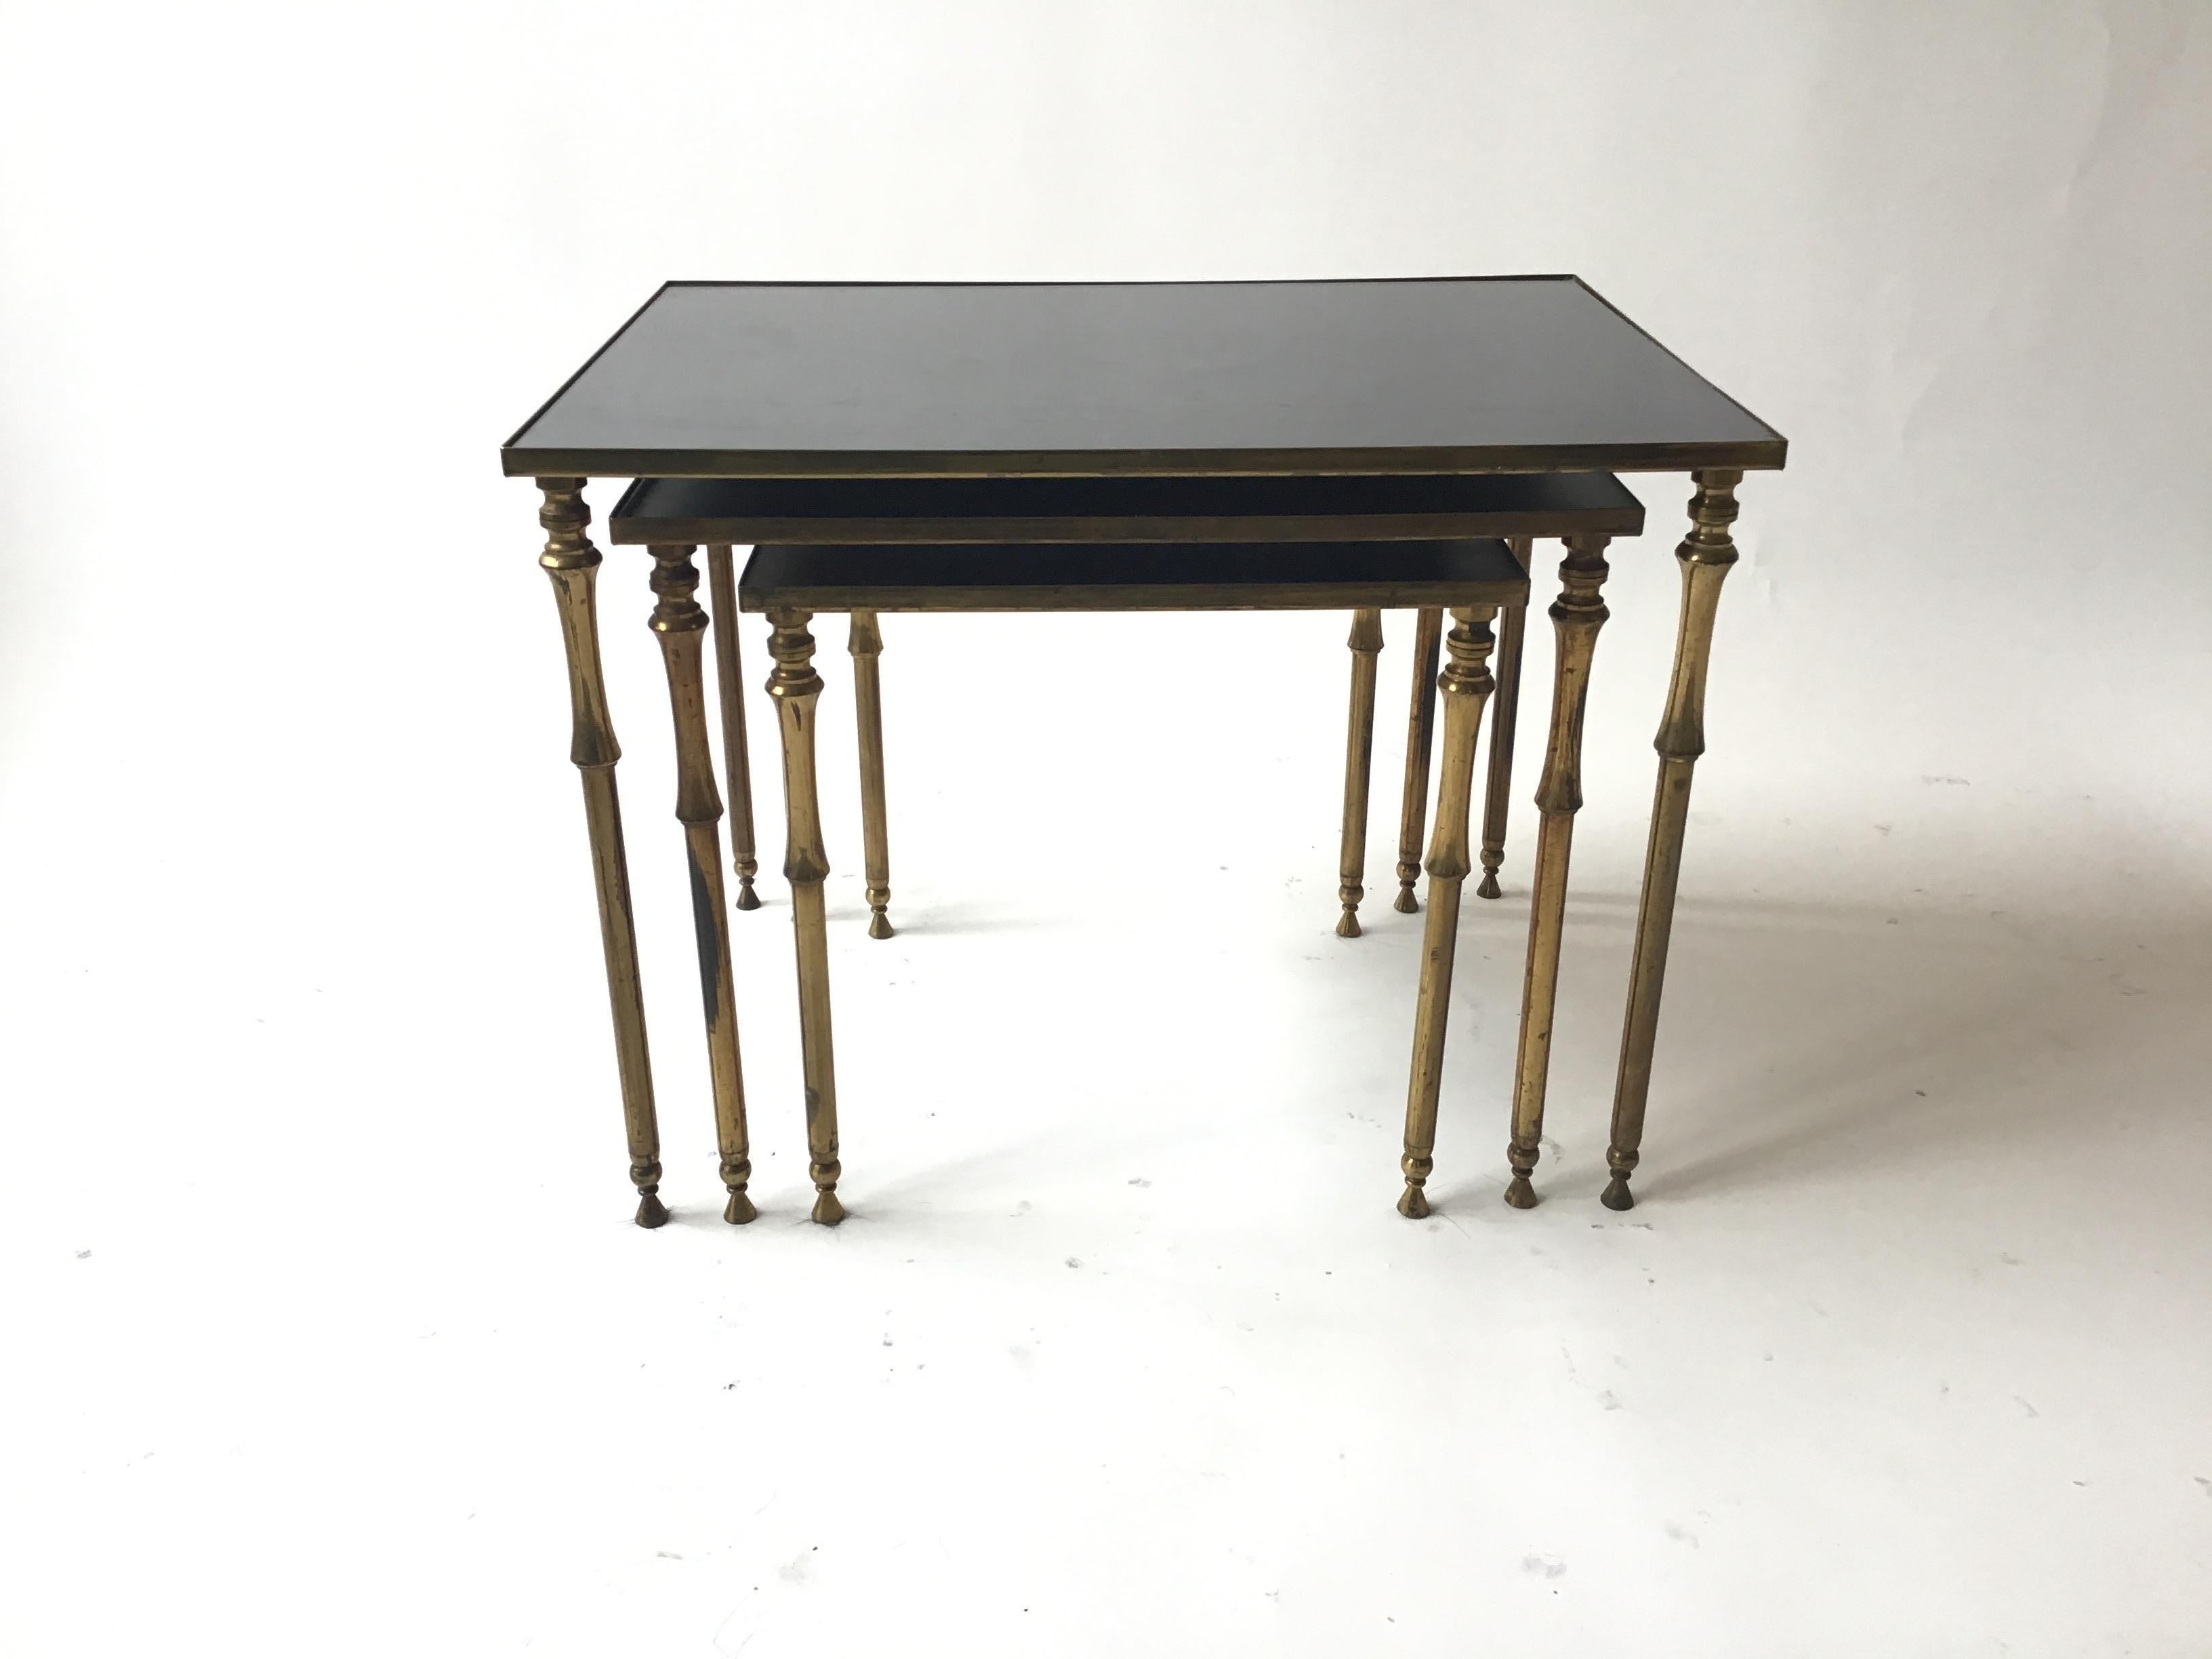 1950s French brass and glass nesting tables.